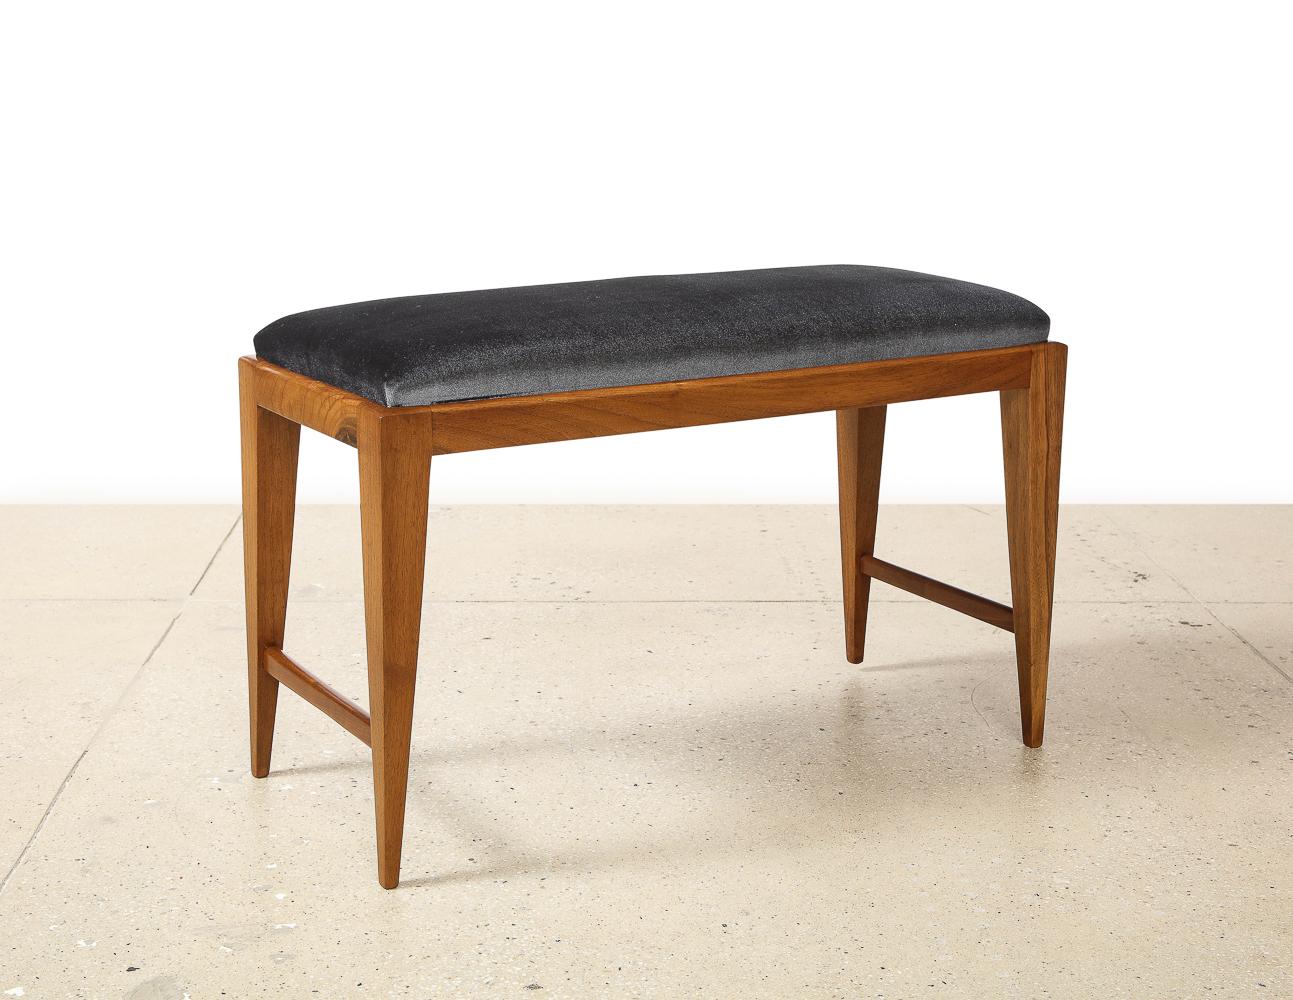 Walnut, upholstery. Sleek and modern upholstered bench.  We now only have 1 bench available.  **Price shown is for 1 bench.